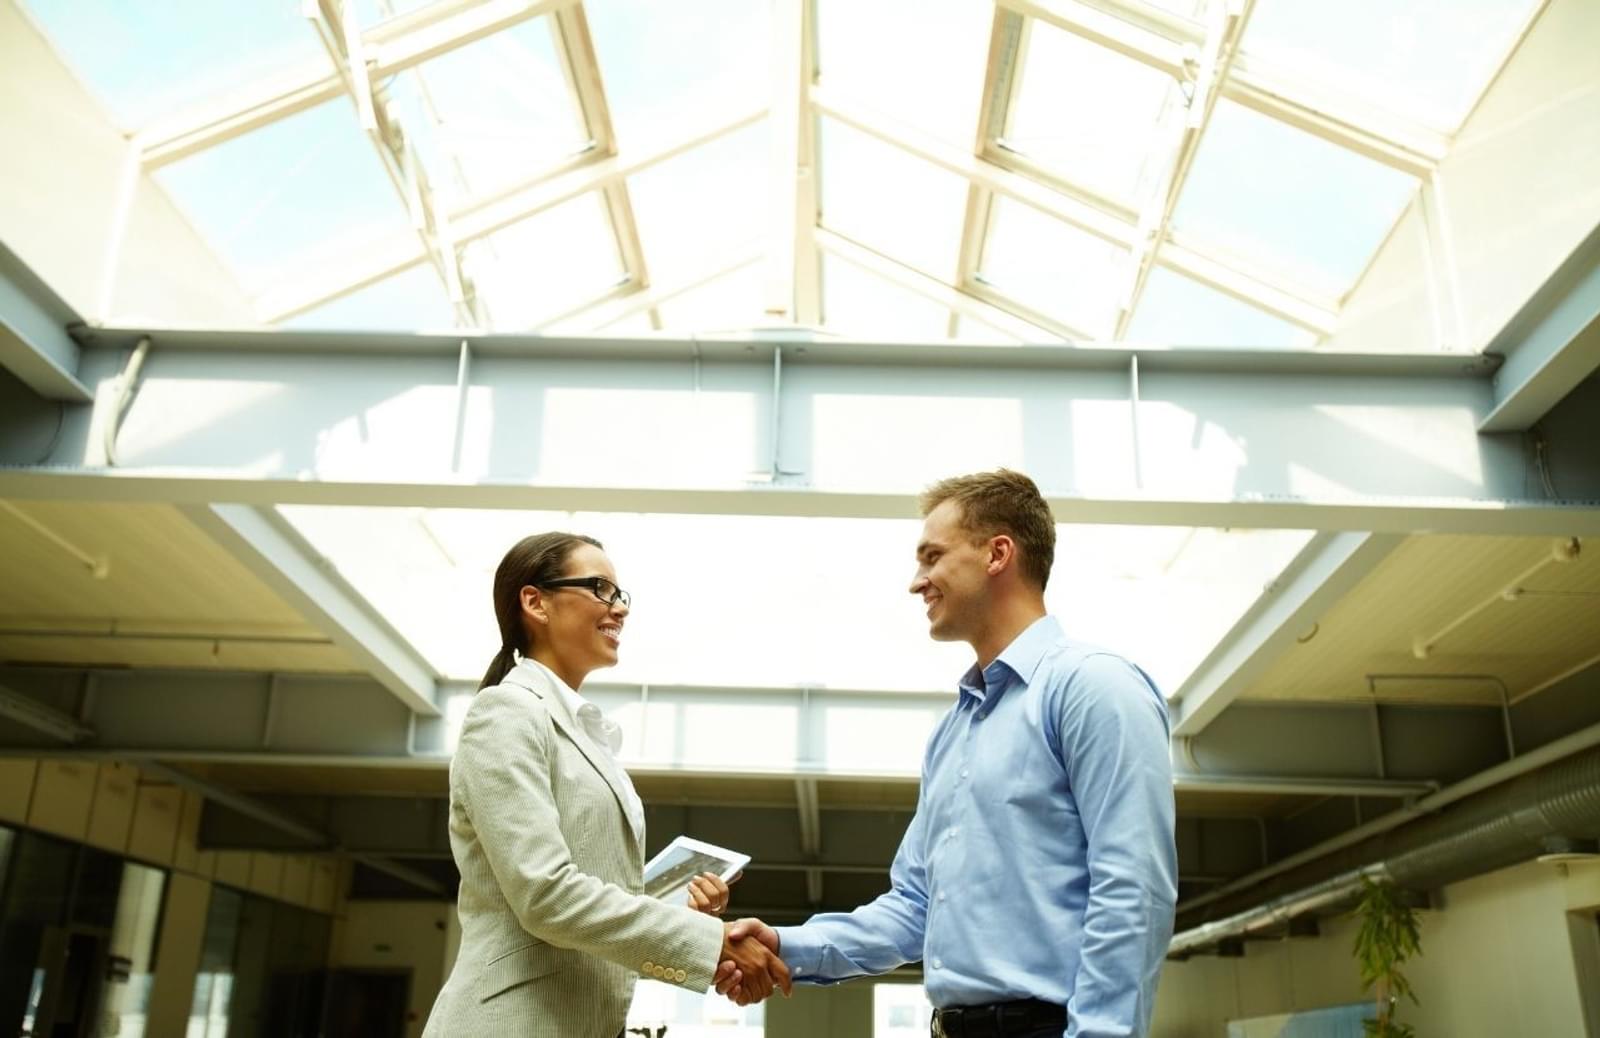 Two professionals shaking hands while standing in glass-covered hallway